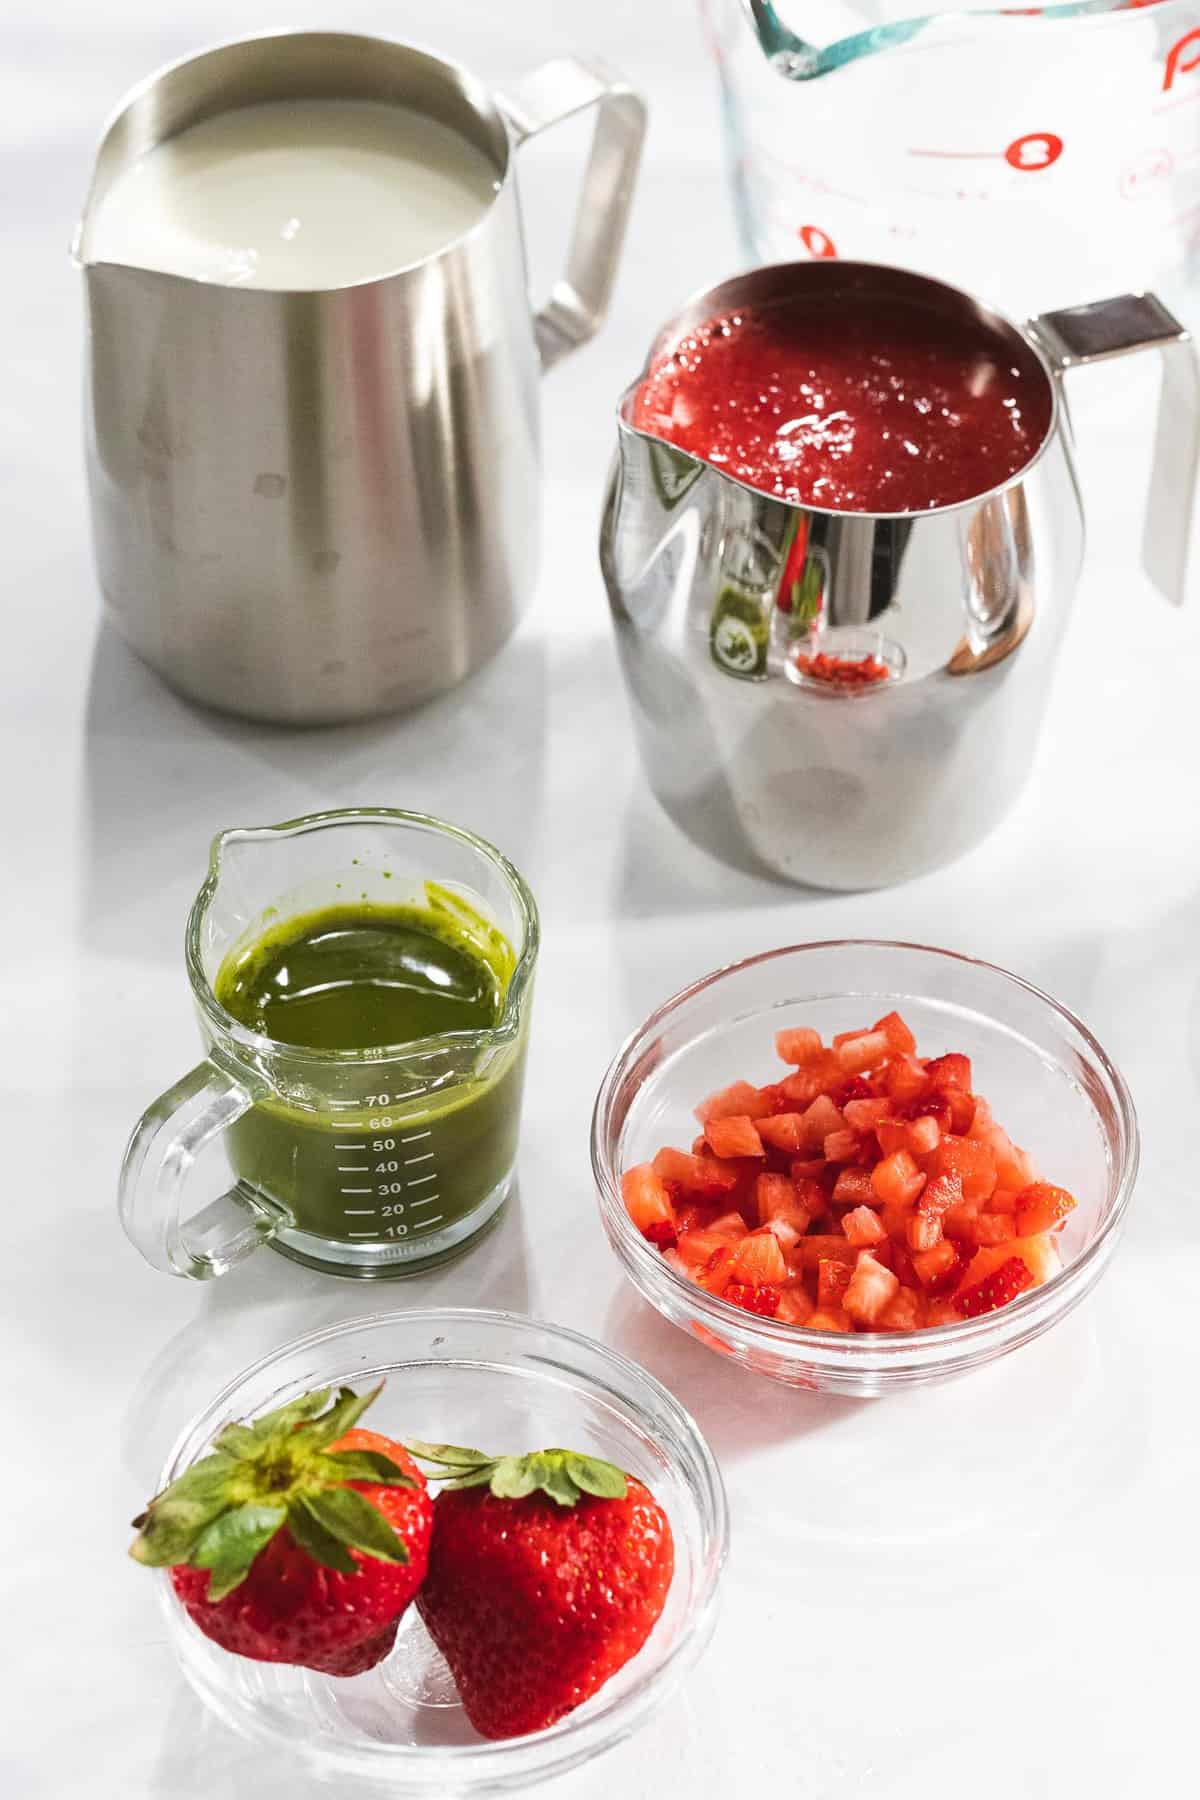 Ingredients for making strawberry matcha latte including green matcha and strawberry puree.